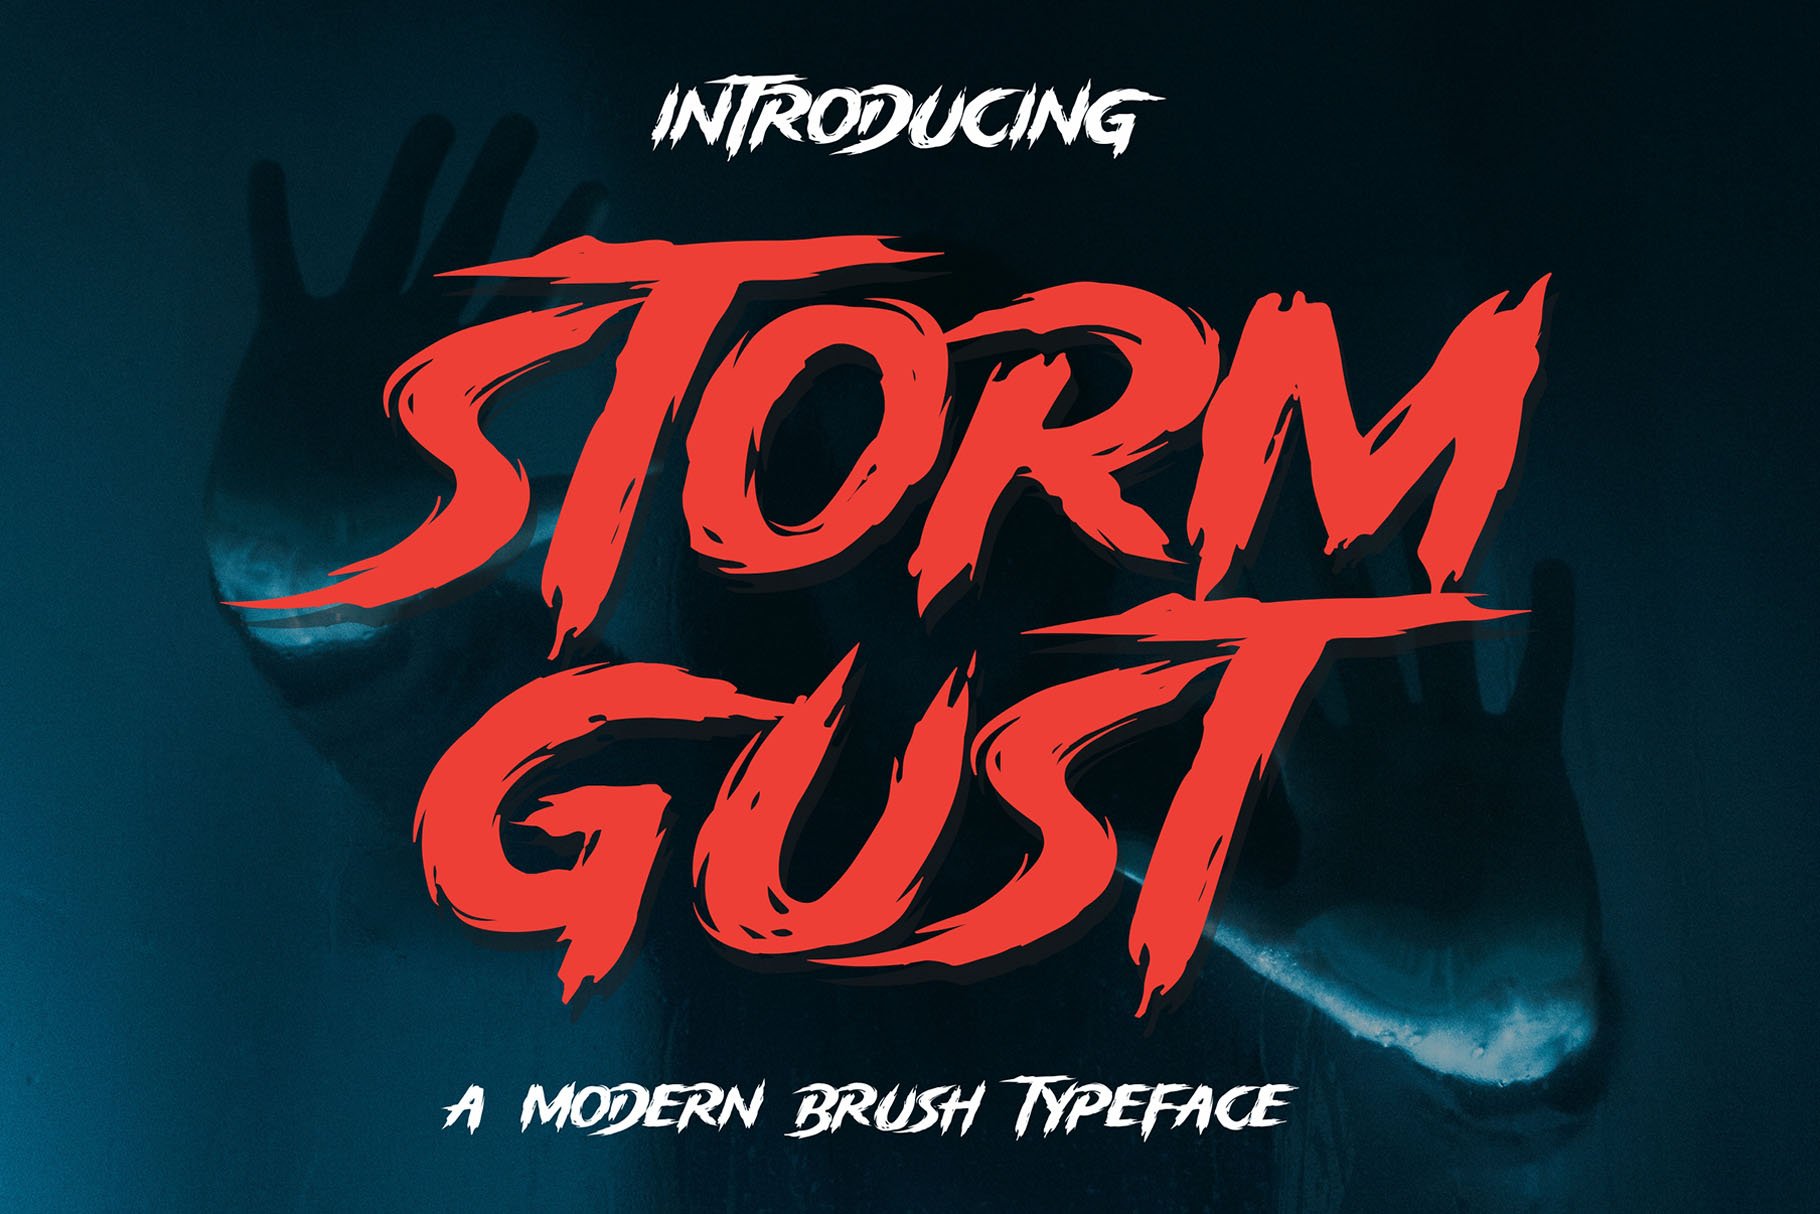 Storm Gust - Horror Font cover image.